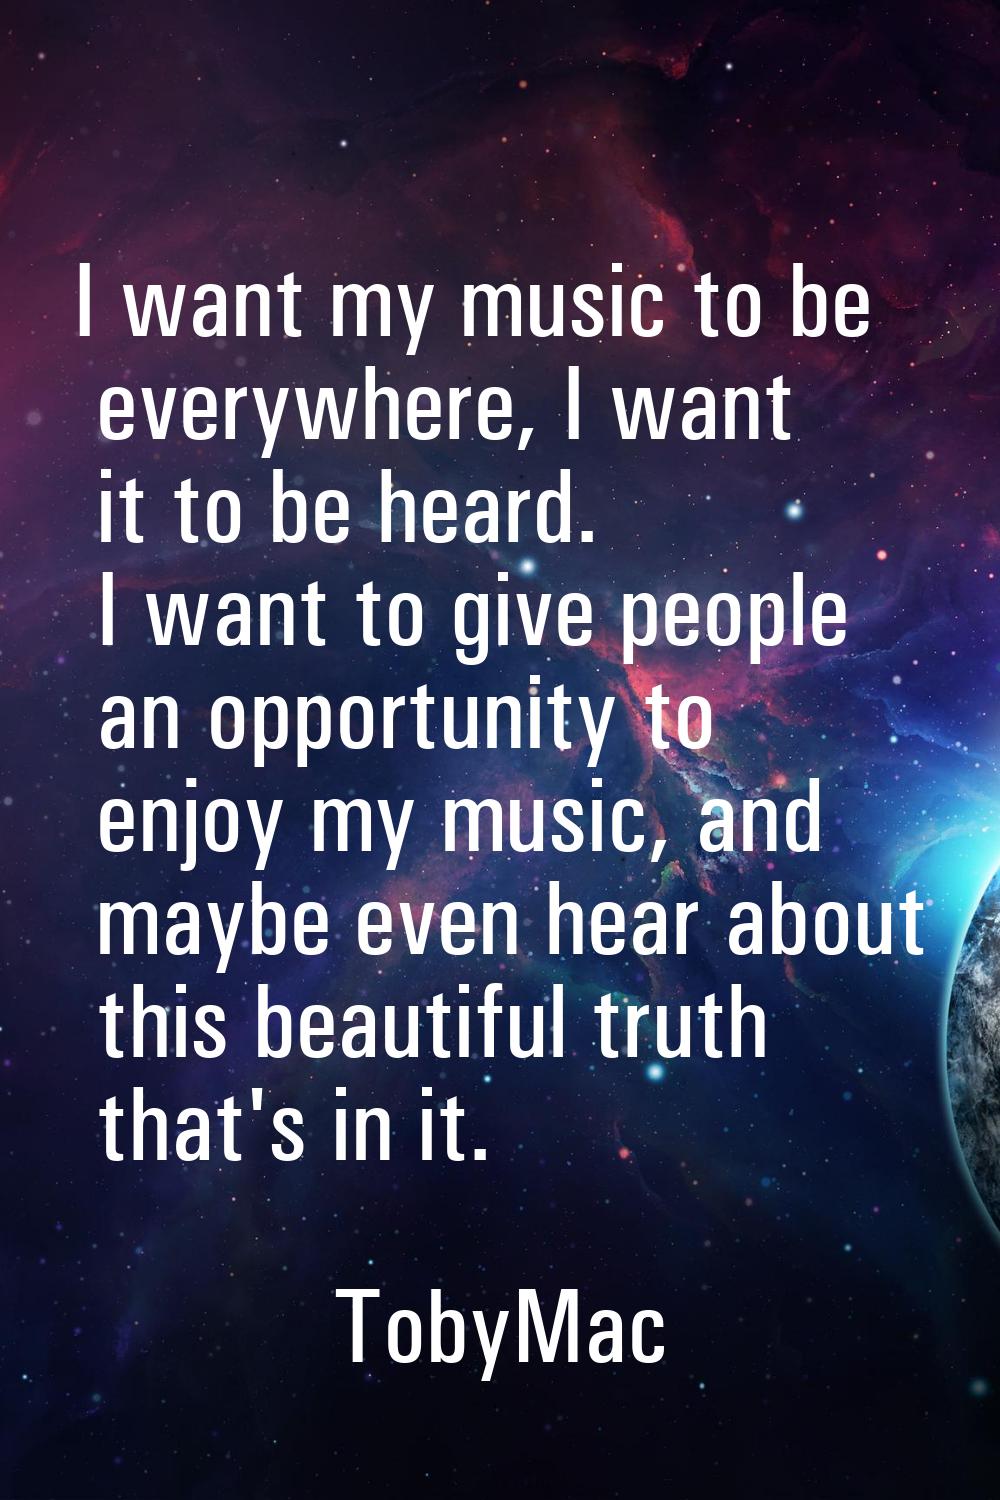 I want my music to be everywhere, I want it to be heard. I want to give people an opportunity to en